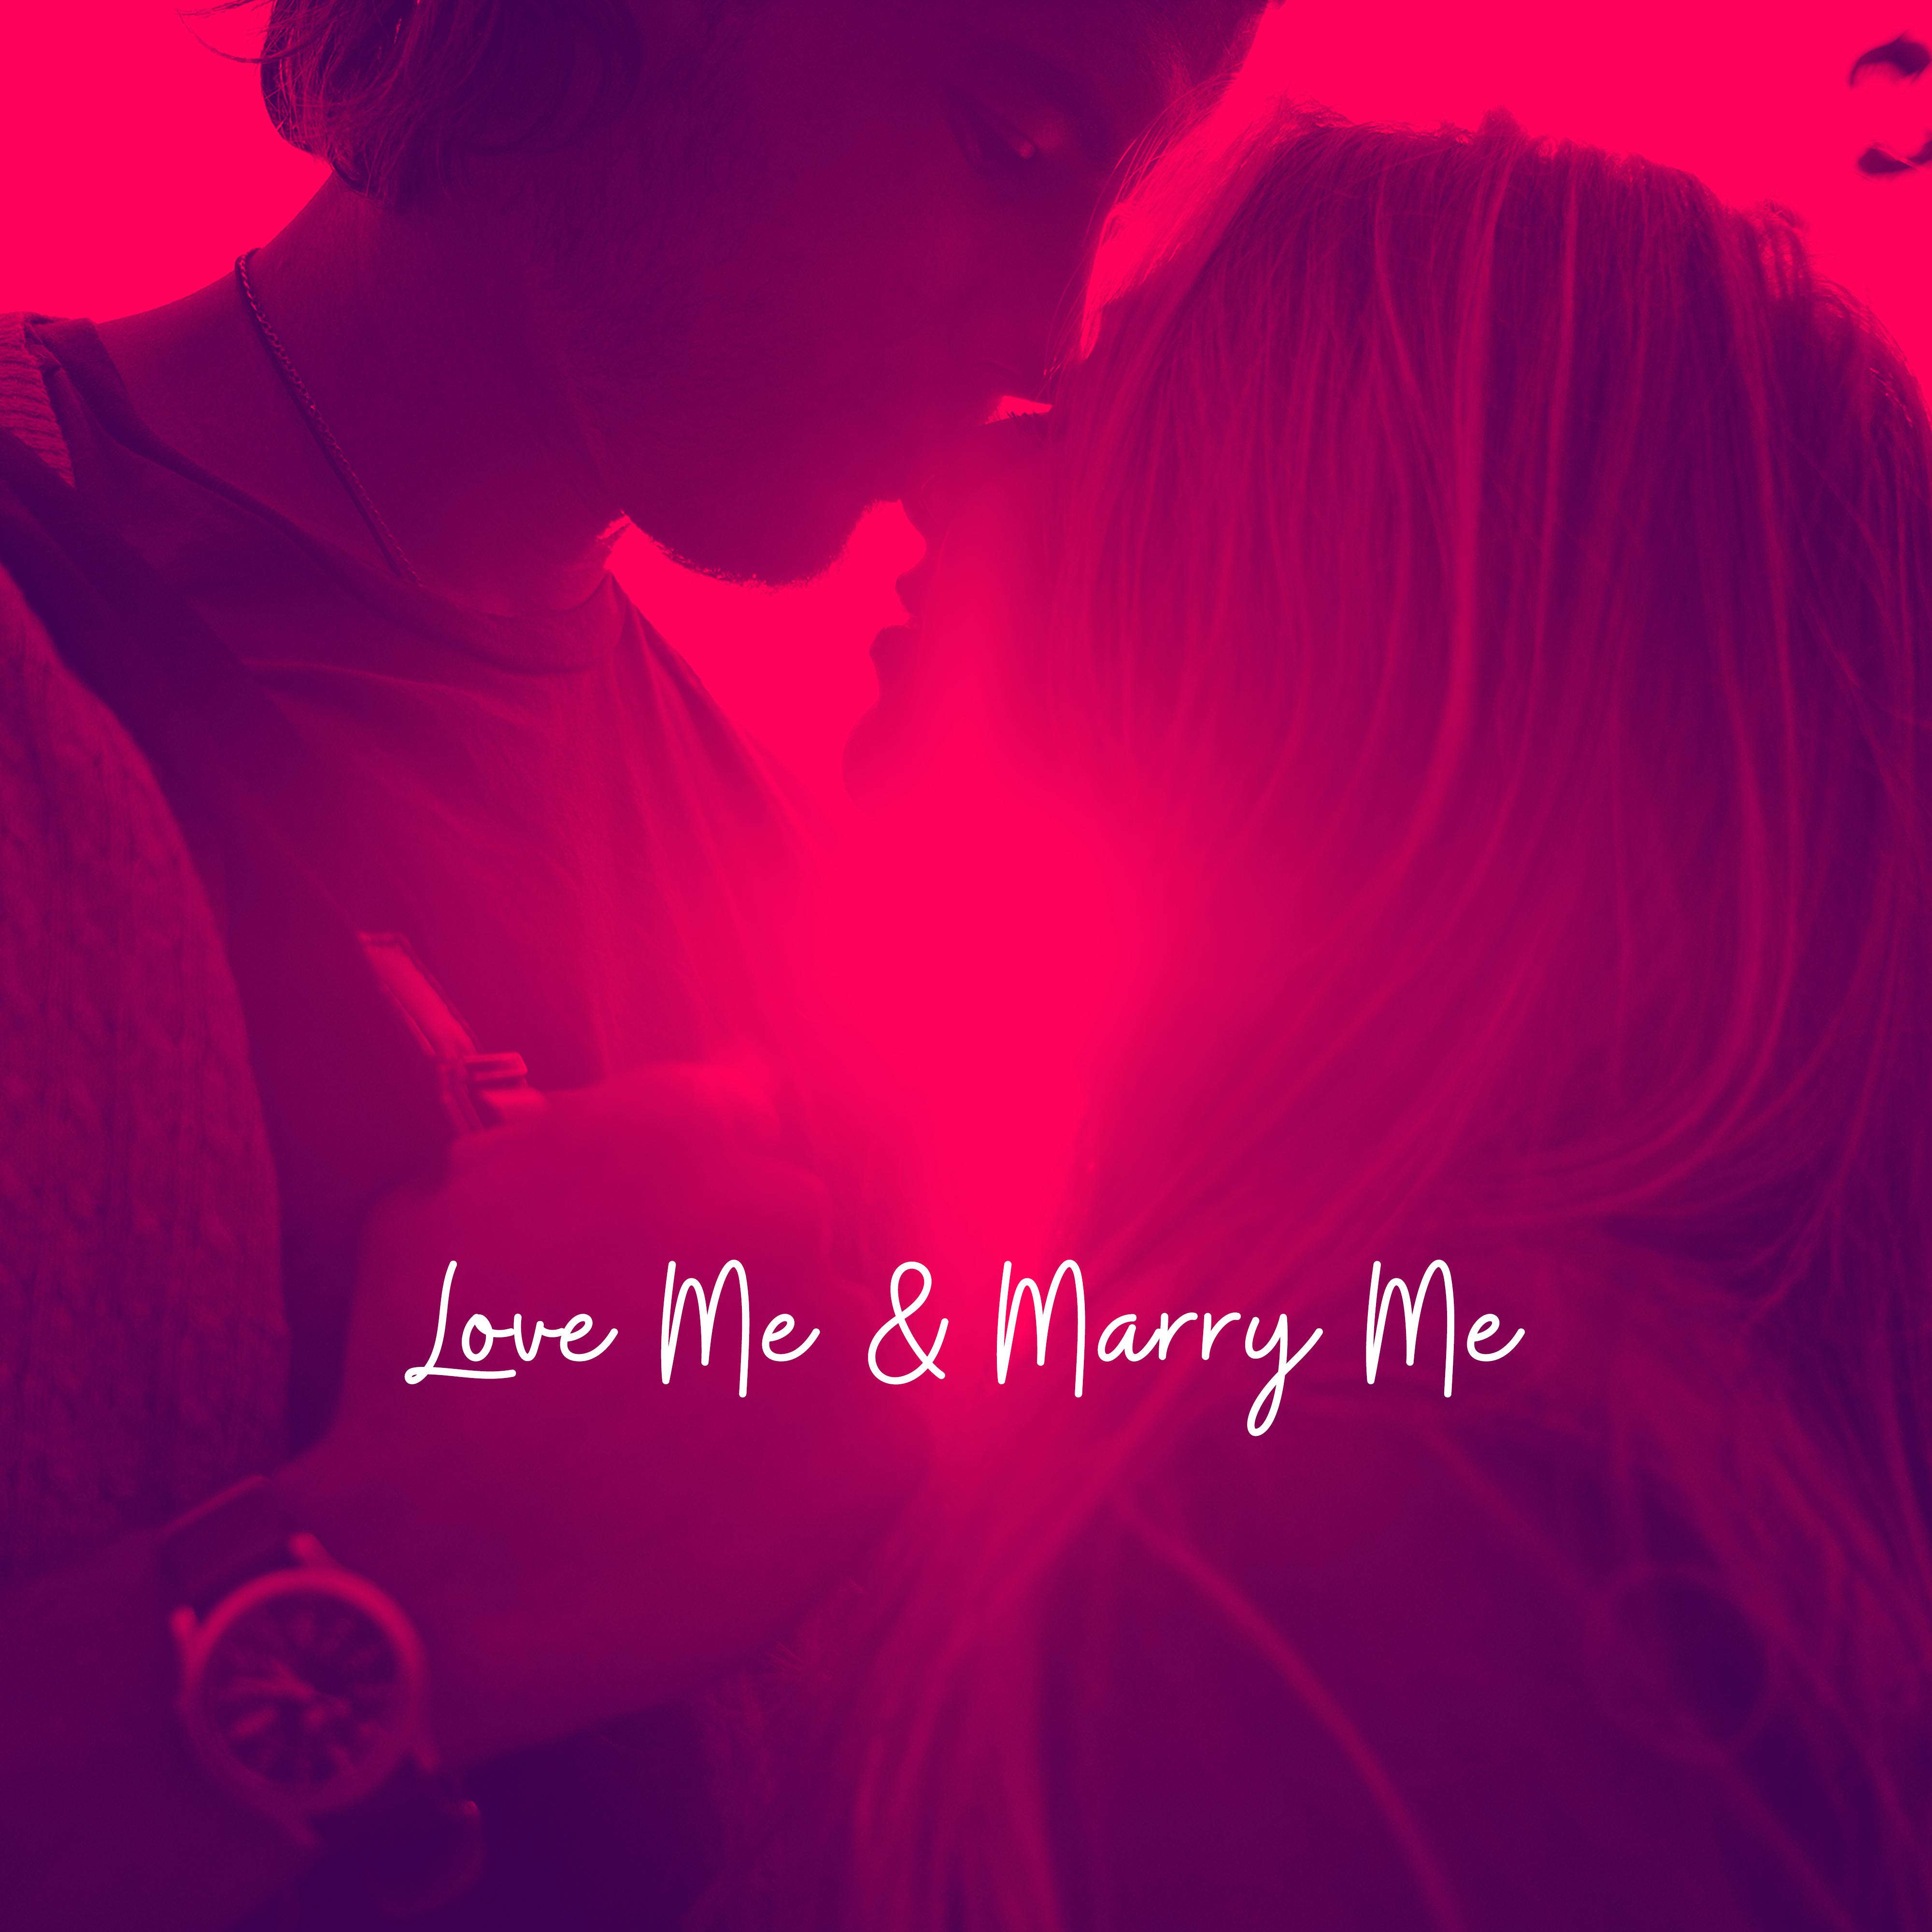 Love Me & Marry Me: 2019 Most Beautiful Piano Jazz Music for Wedding Day, Slow Melodies Full of Love for Bride & Groom Dance